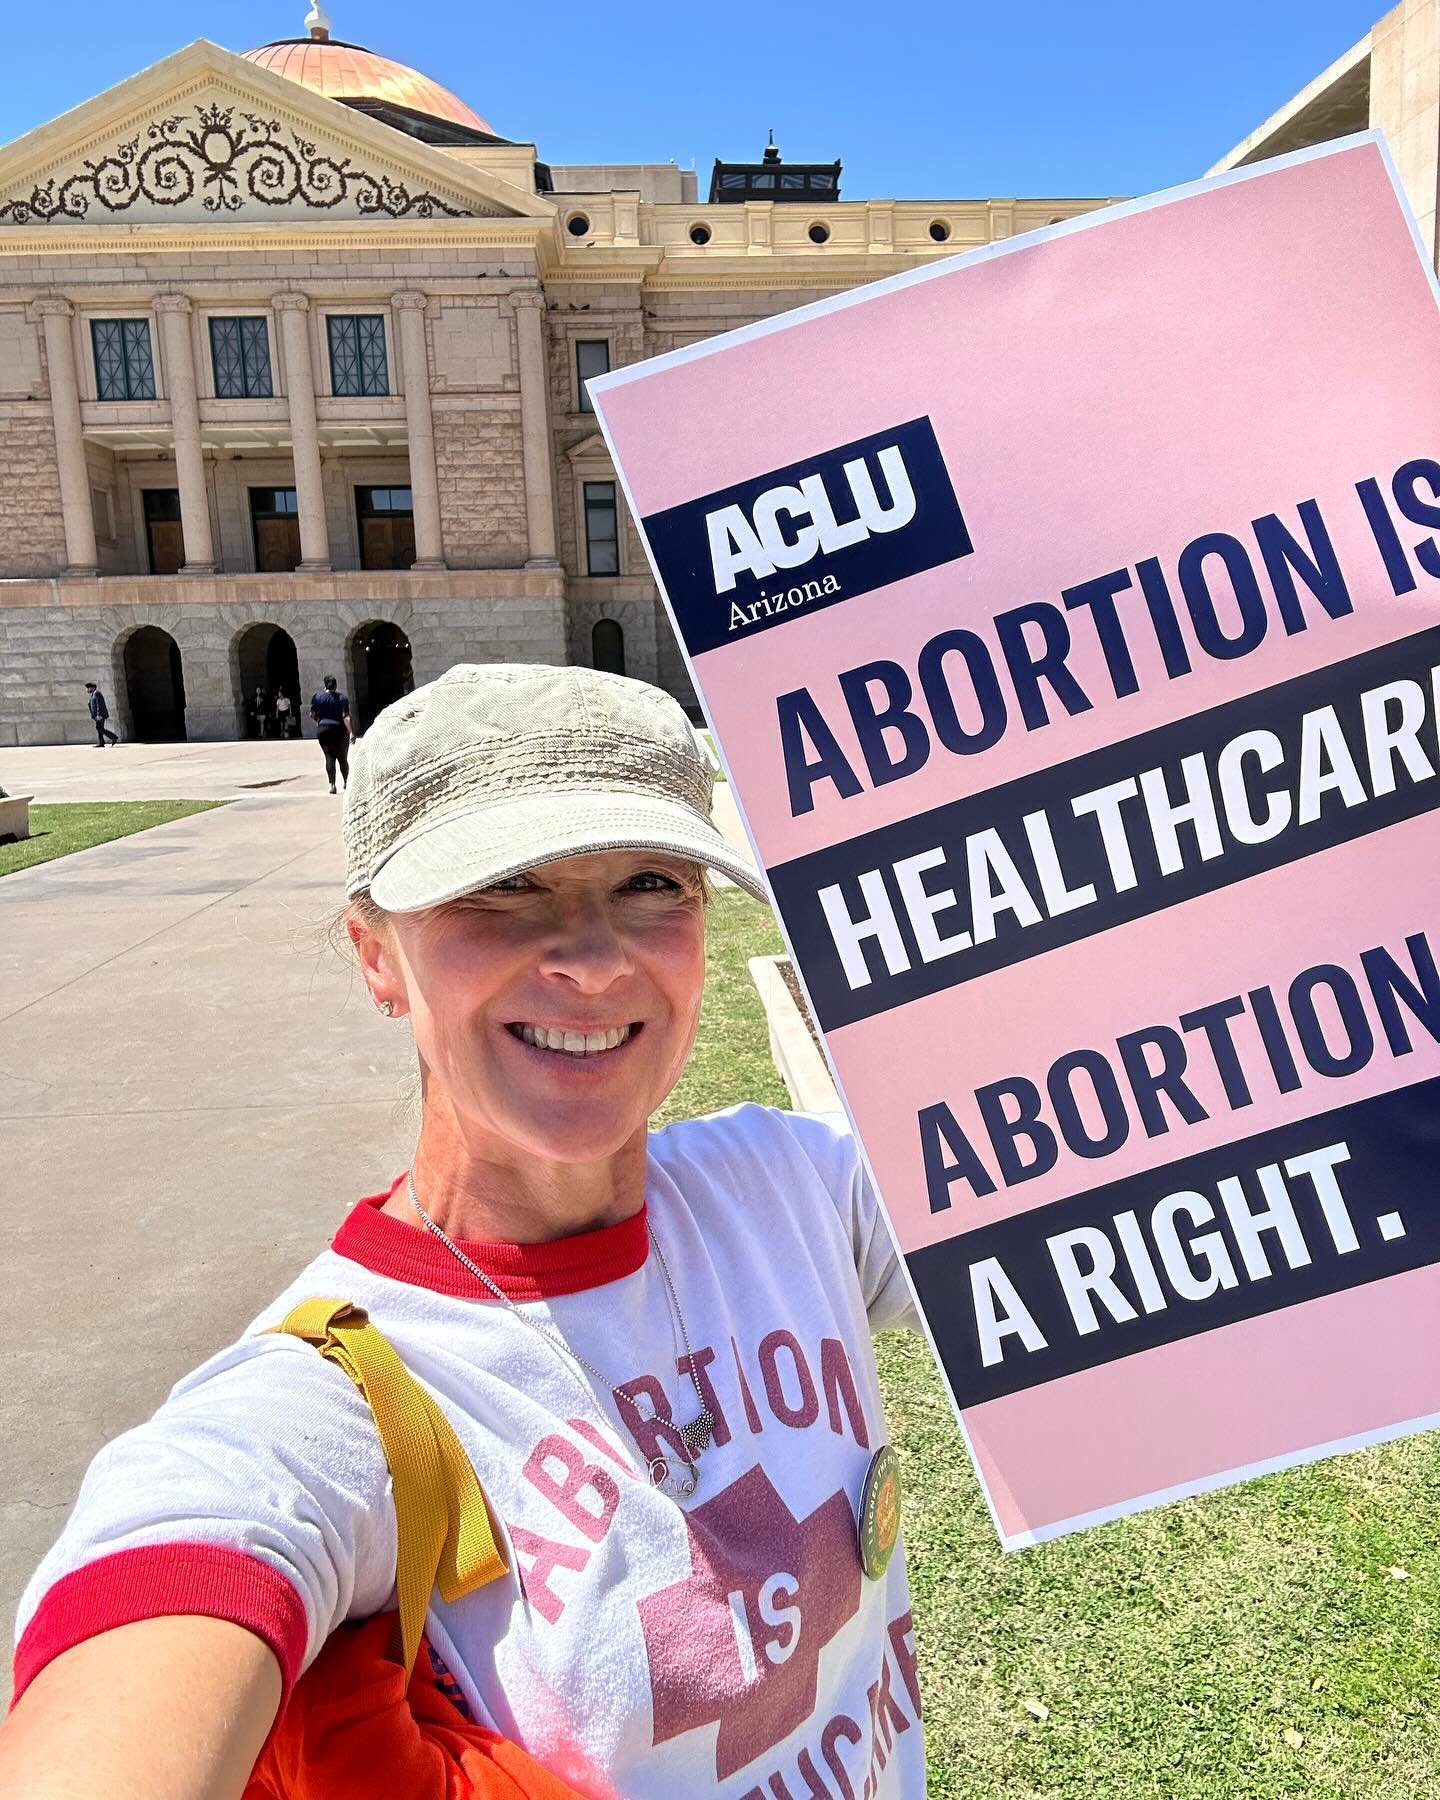 A tiring day at the state capitol today and a good example of why it is so hard to get things done.
.
Joined with representatives of @horneforarizona @pparizona 
@healthcarerisingaz 
@arizonaforabortionaccess 
.
Despite a valiant fight by @azhousedem